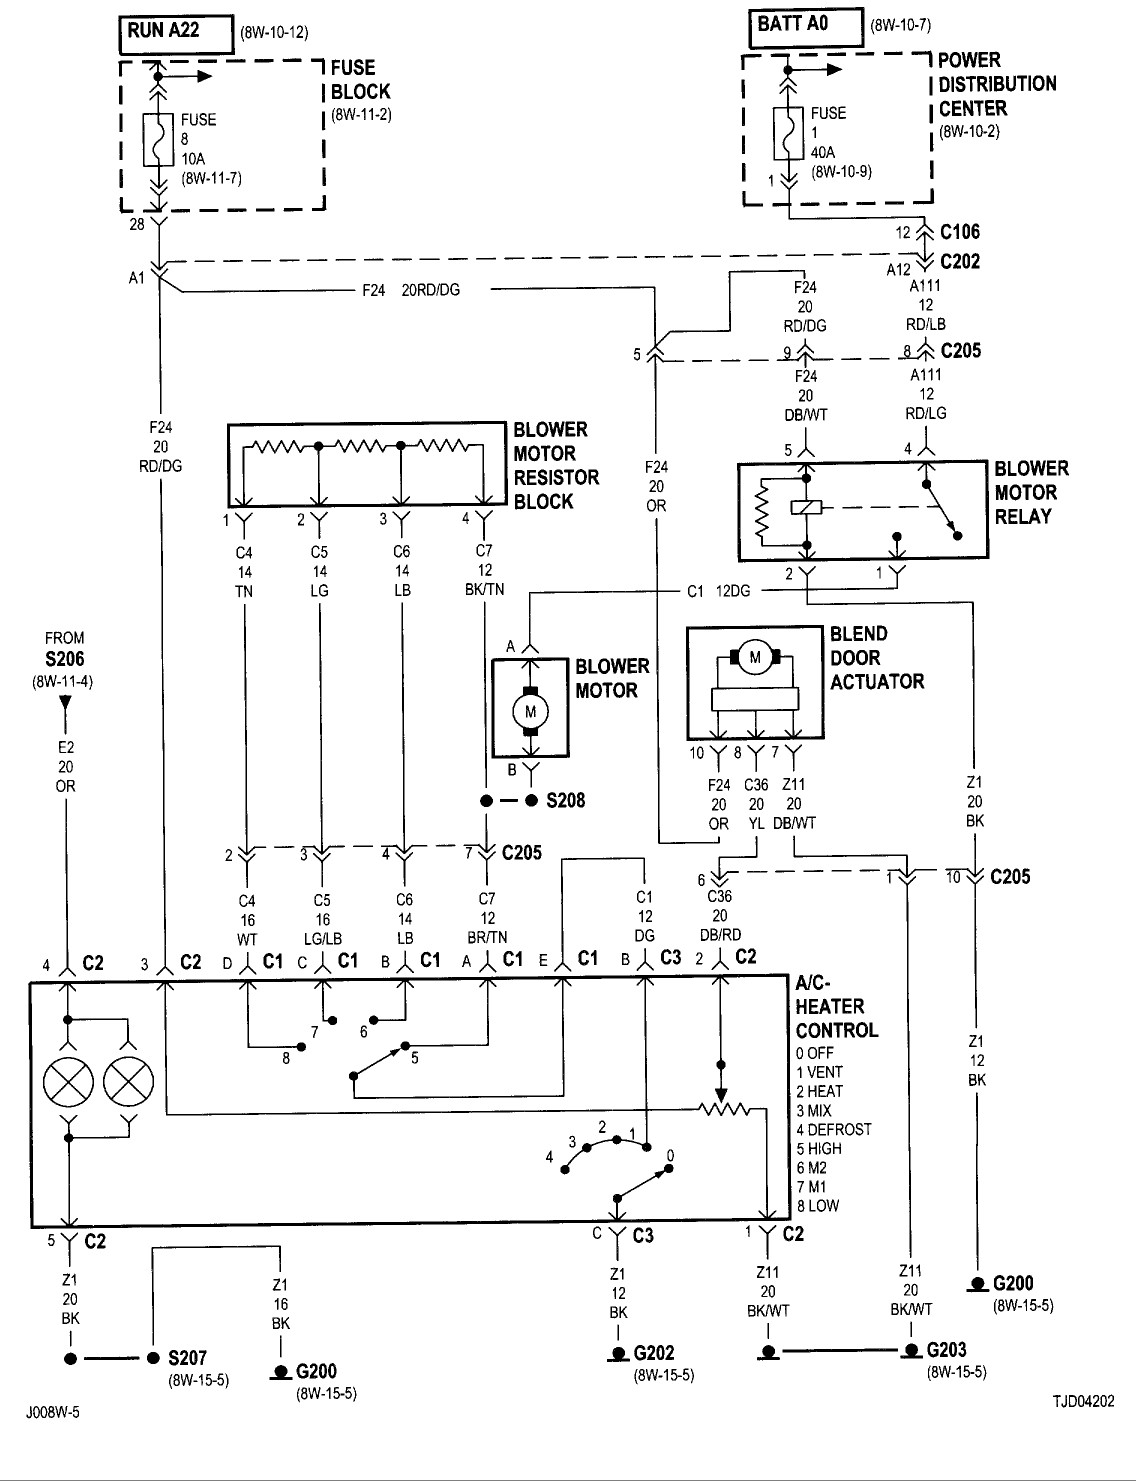 2015 Jeep Wrangler Wiring Diagram from mainetreasurechest.com